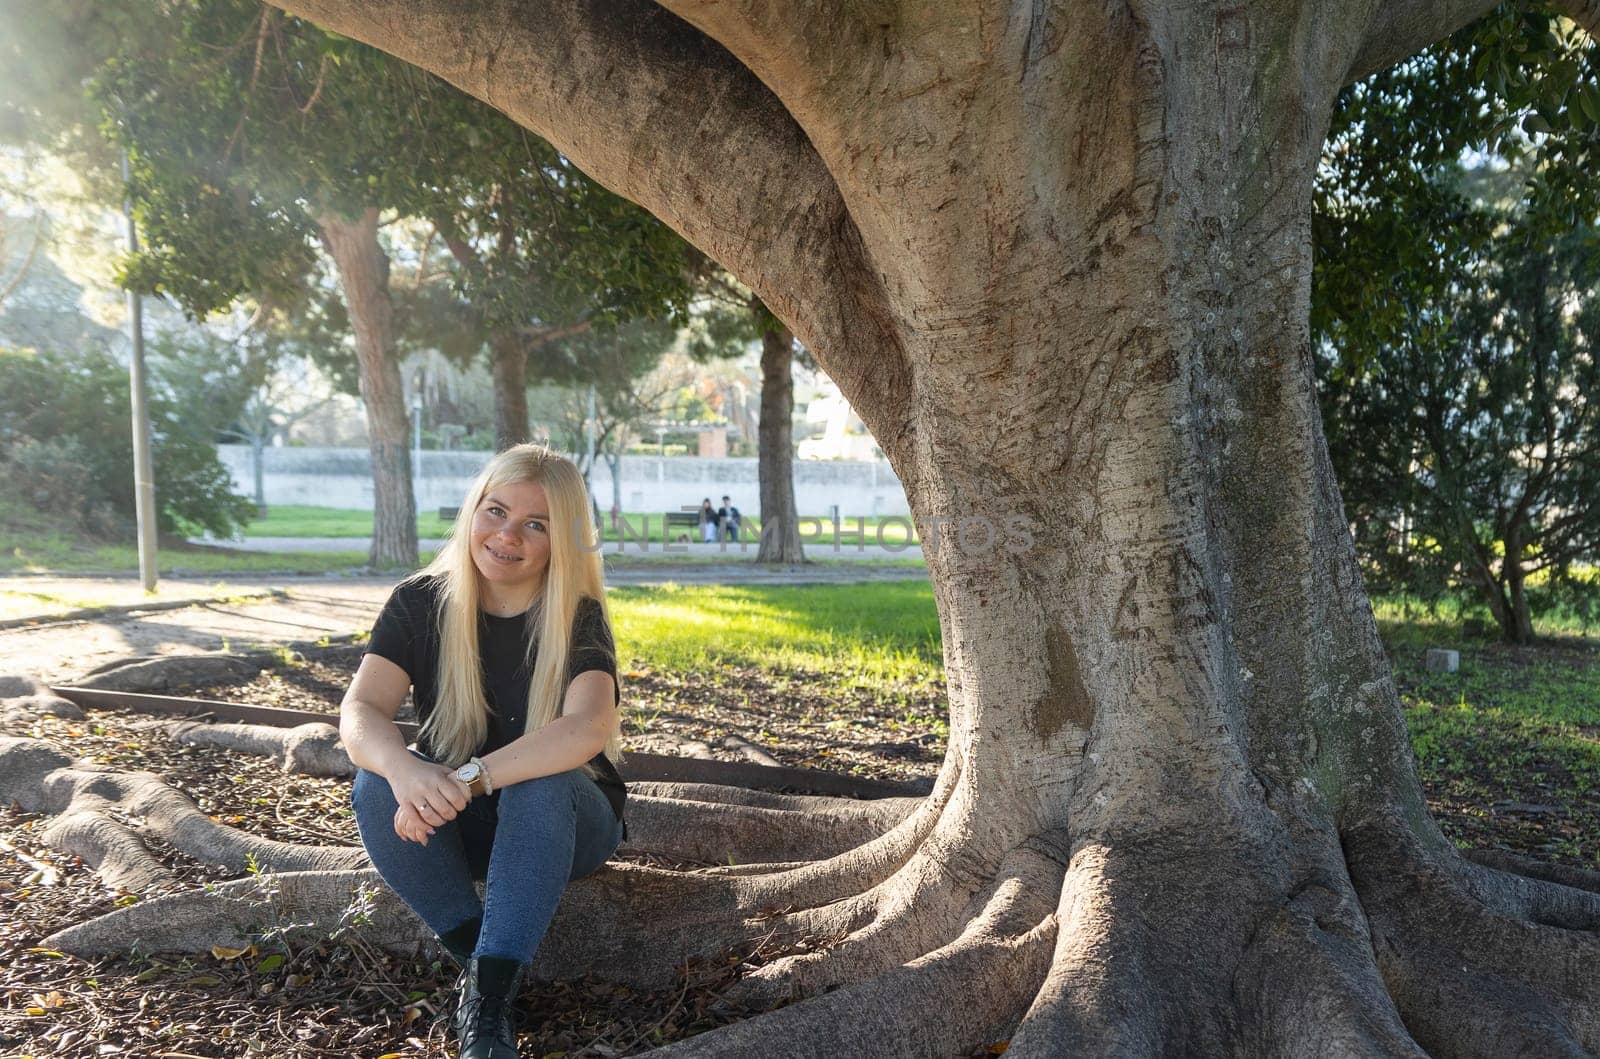 A young woman with braces is sitting under a large tree in a park, smiling and enjoying the outdoors on a sunny day.